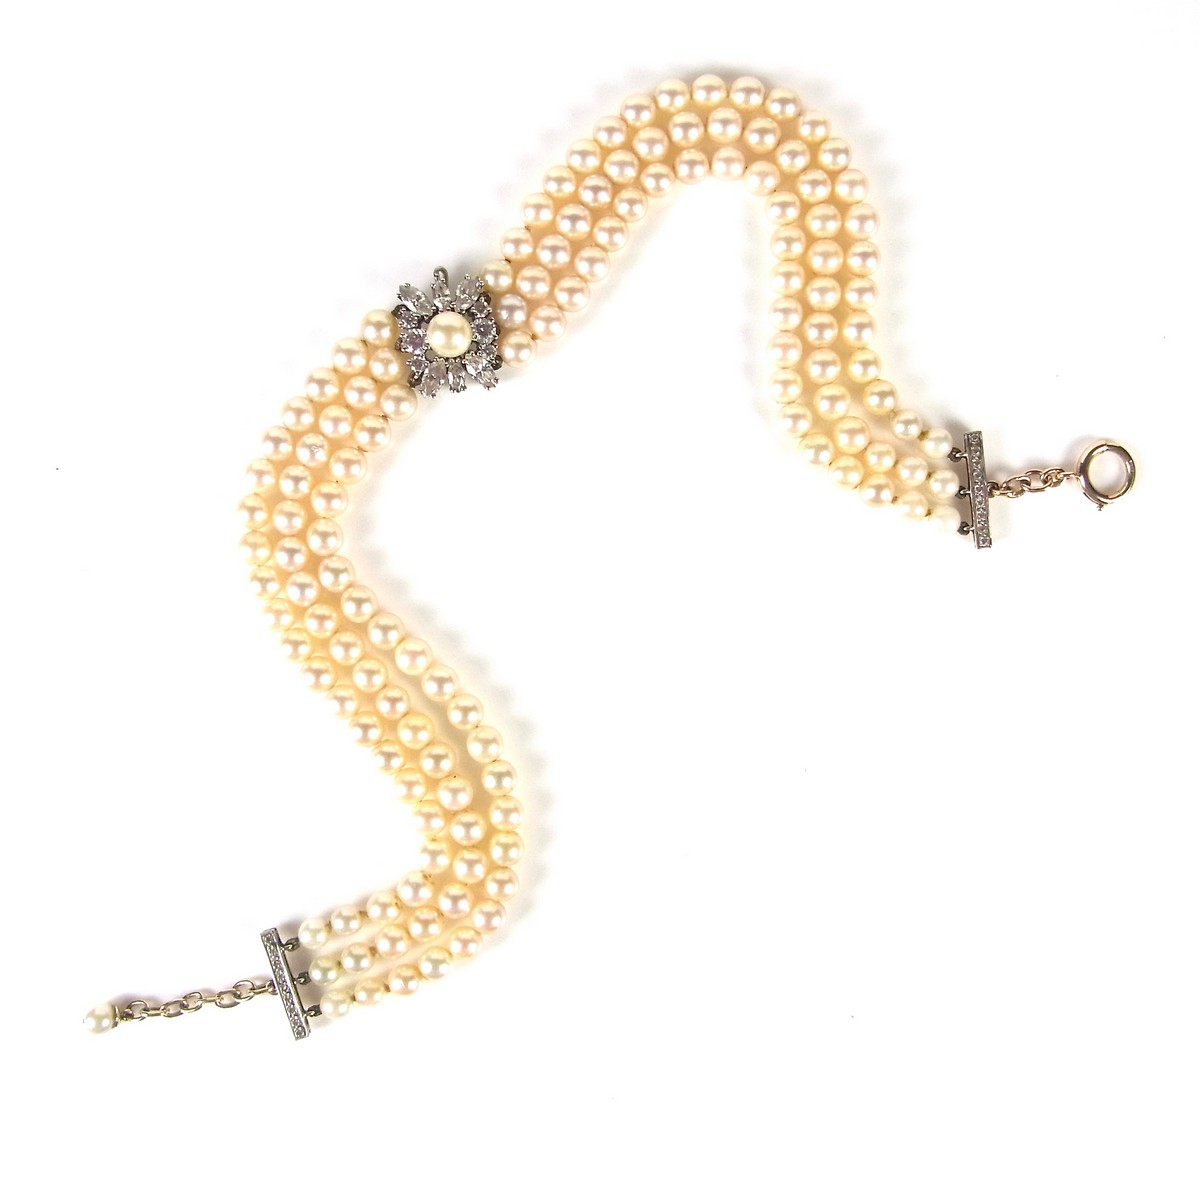 9 ct yellow and white gold pearl choker necklace.